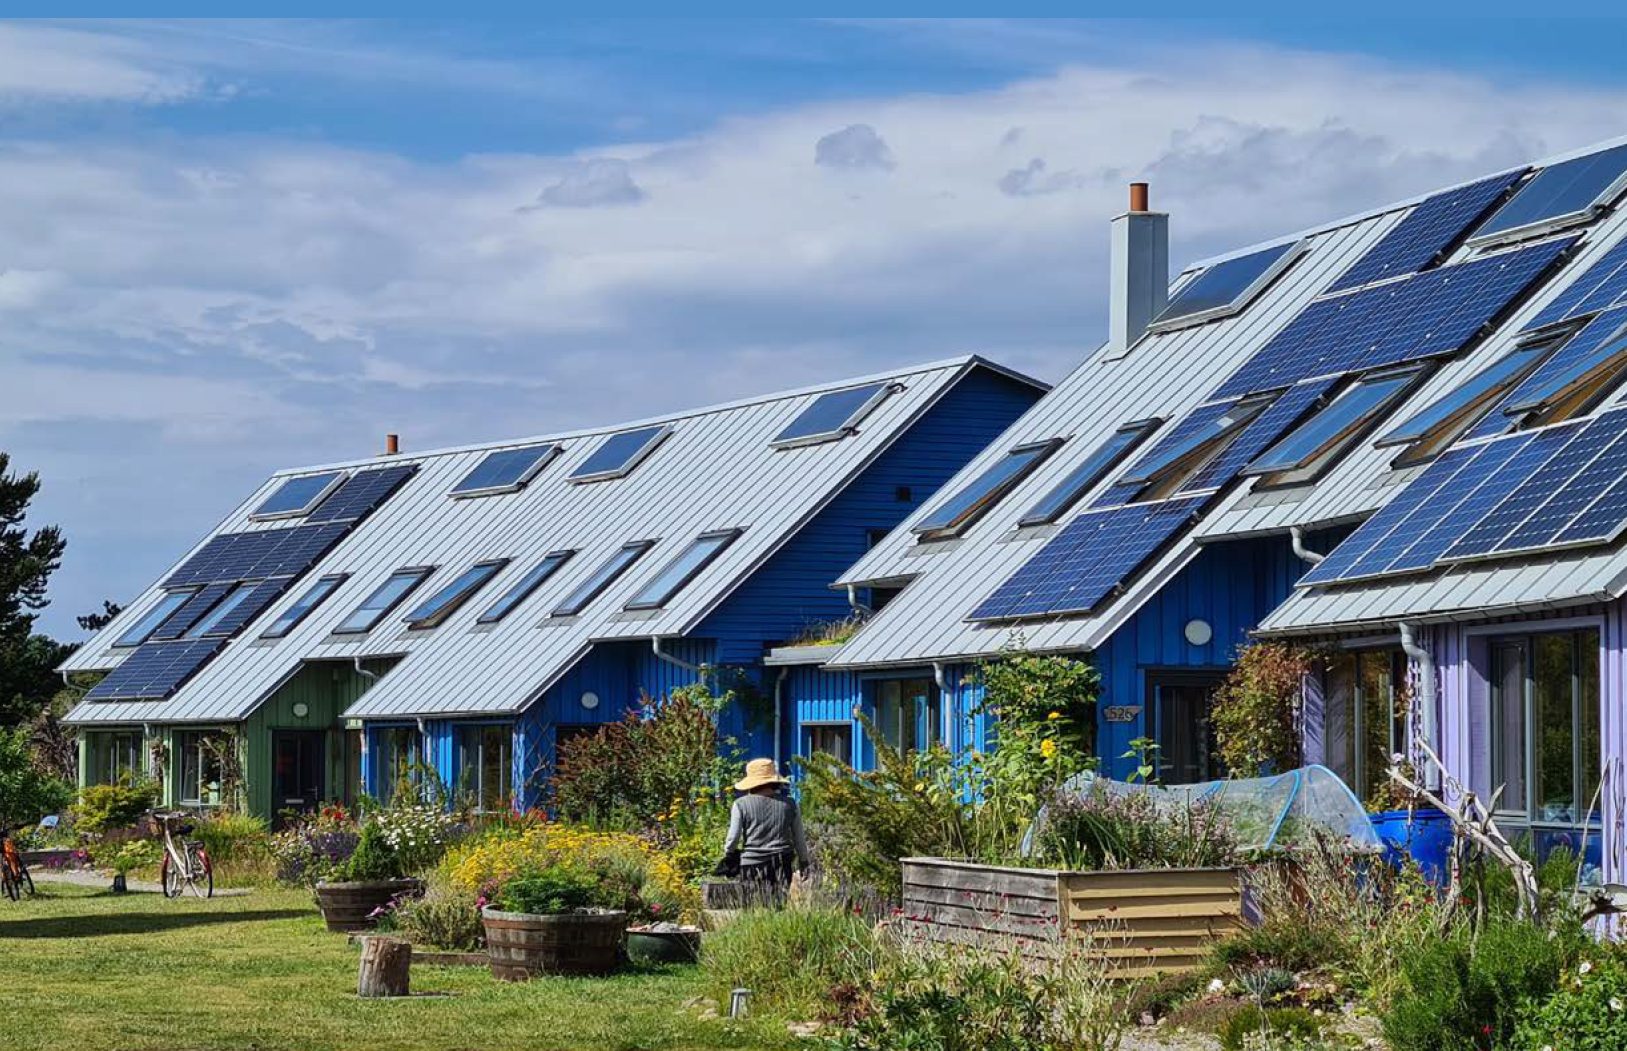 A row of houses with solar panels and backyard garden. Appeared in the cover of the IPCC report